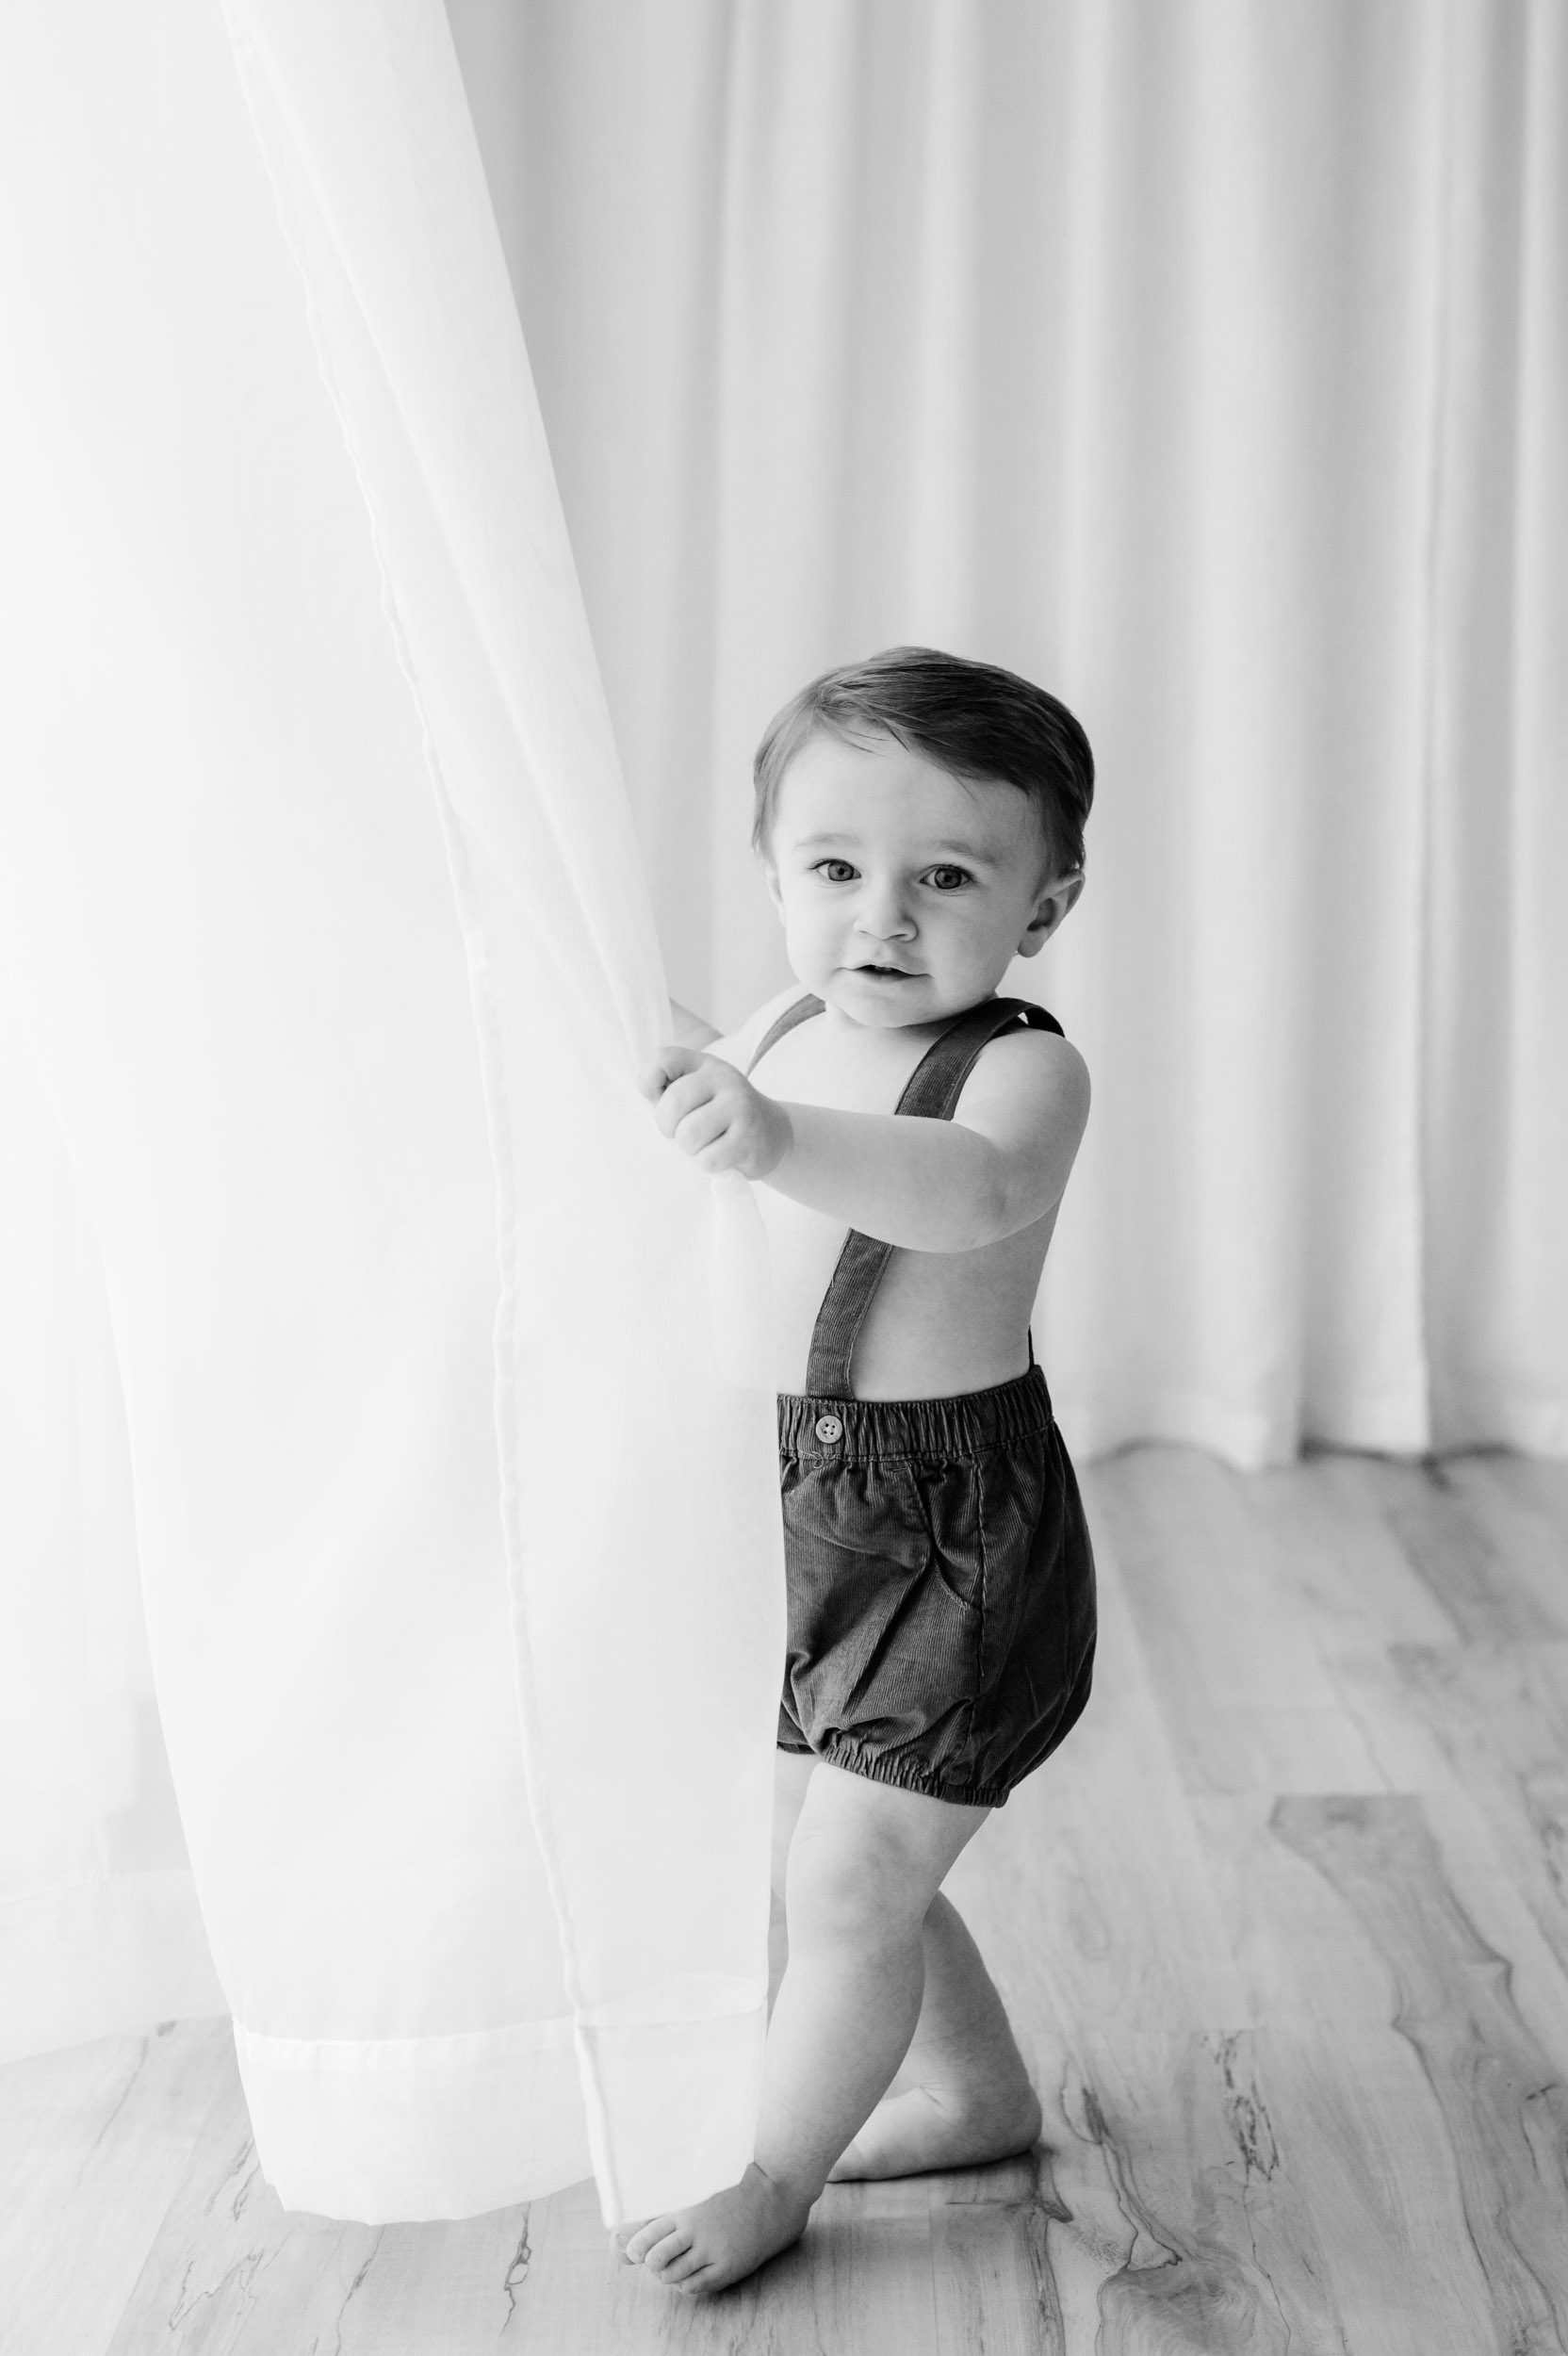 a black and white picture of a young boy looking directly at the camera as he plays with a sheer curtain during a 1st birthday photo session